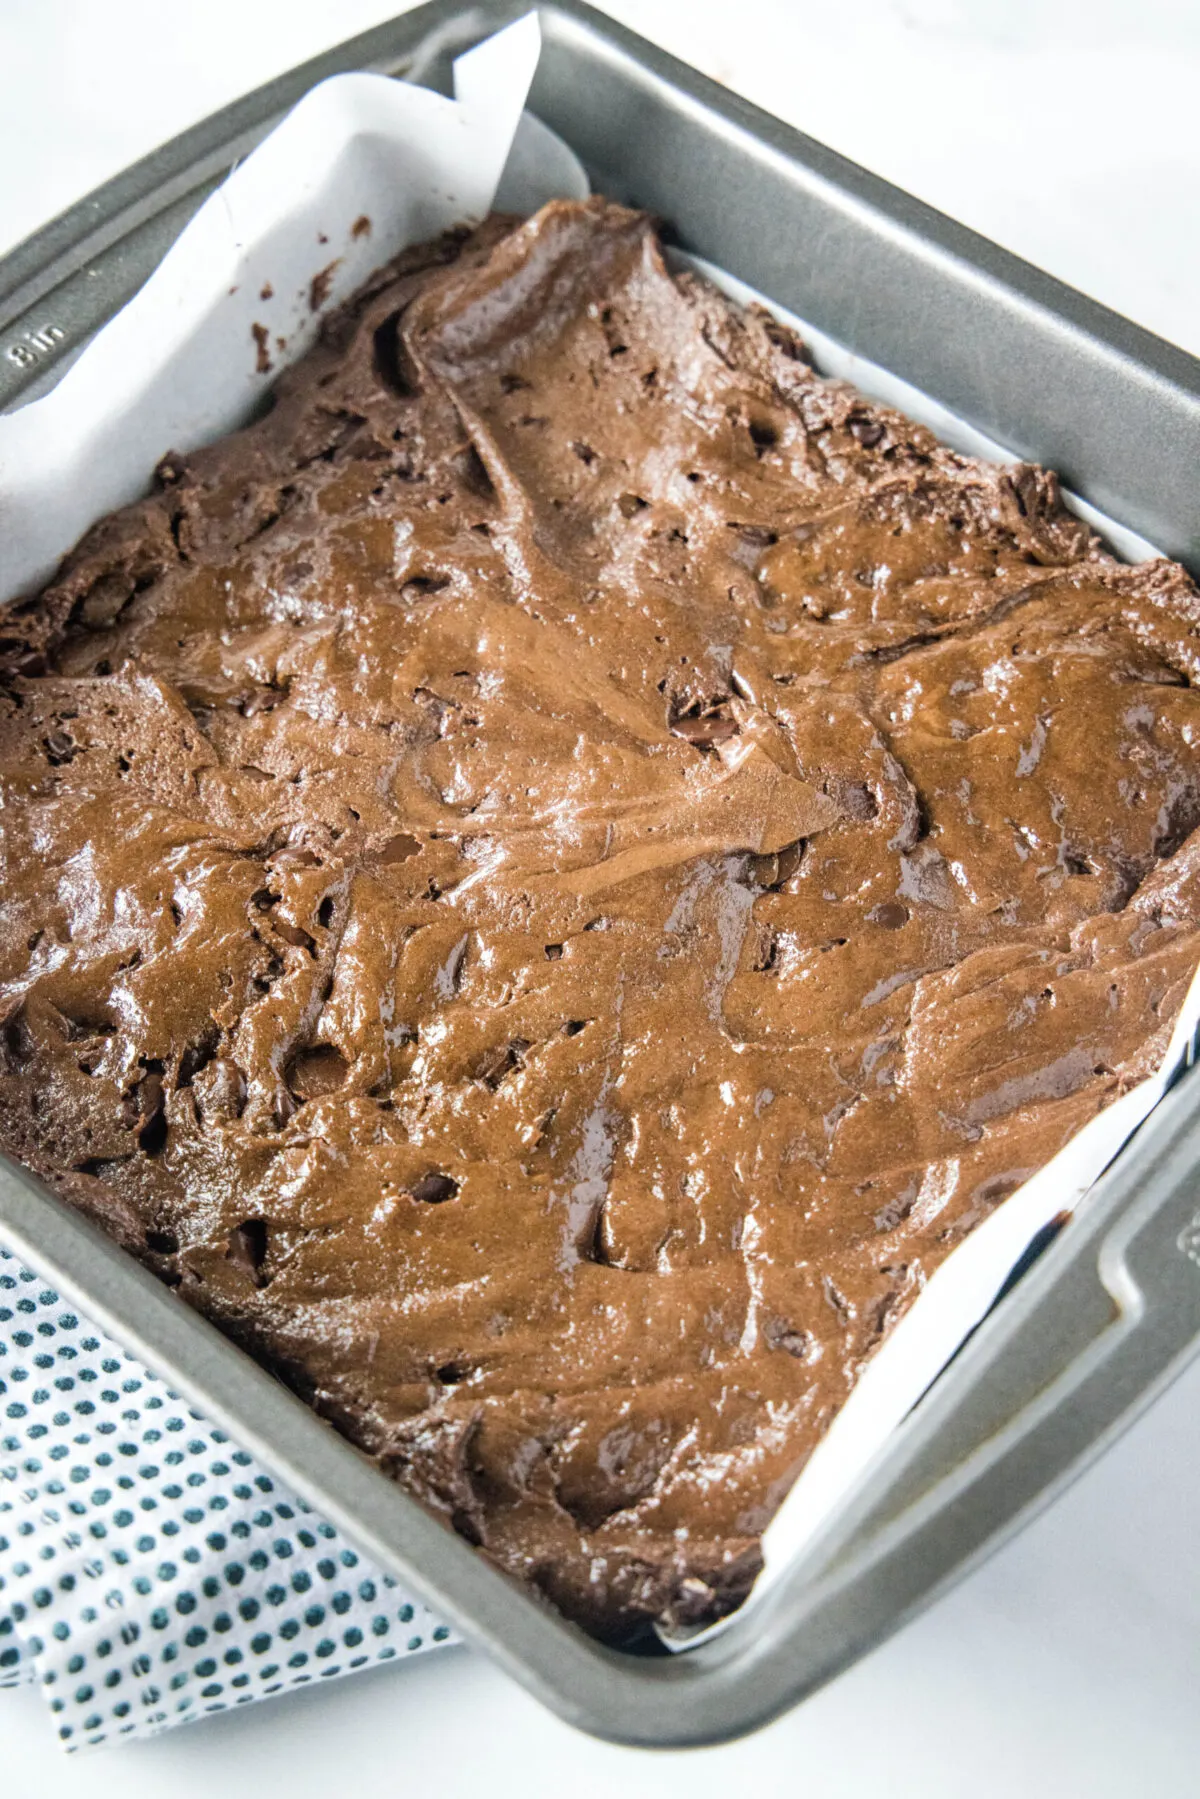 Overhead view of a square baking dish lined with parchment paper and filled with brownie batter